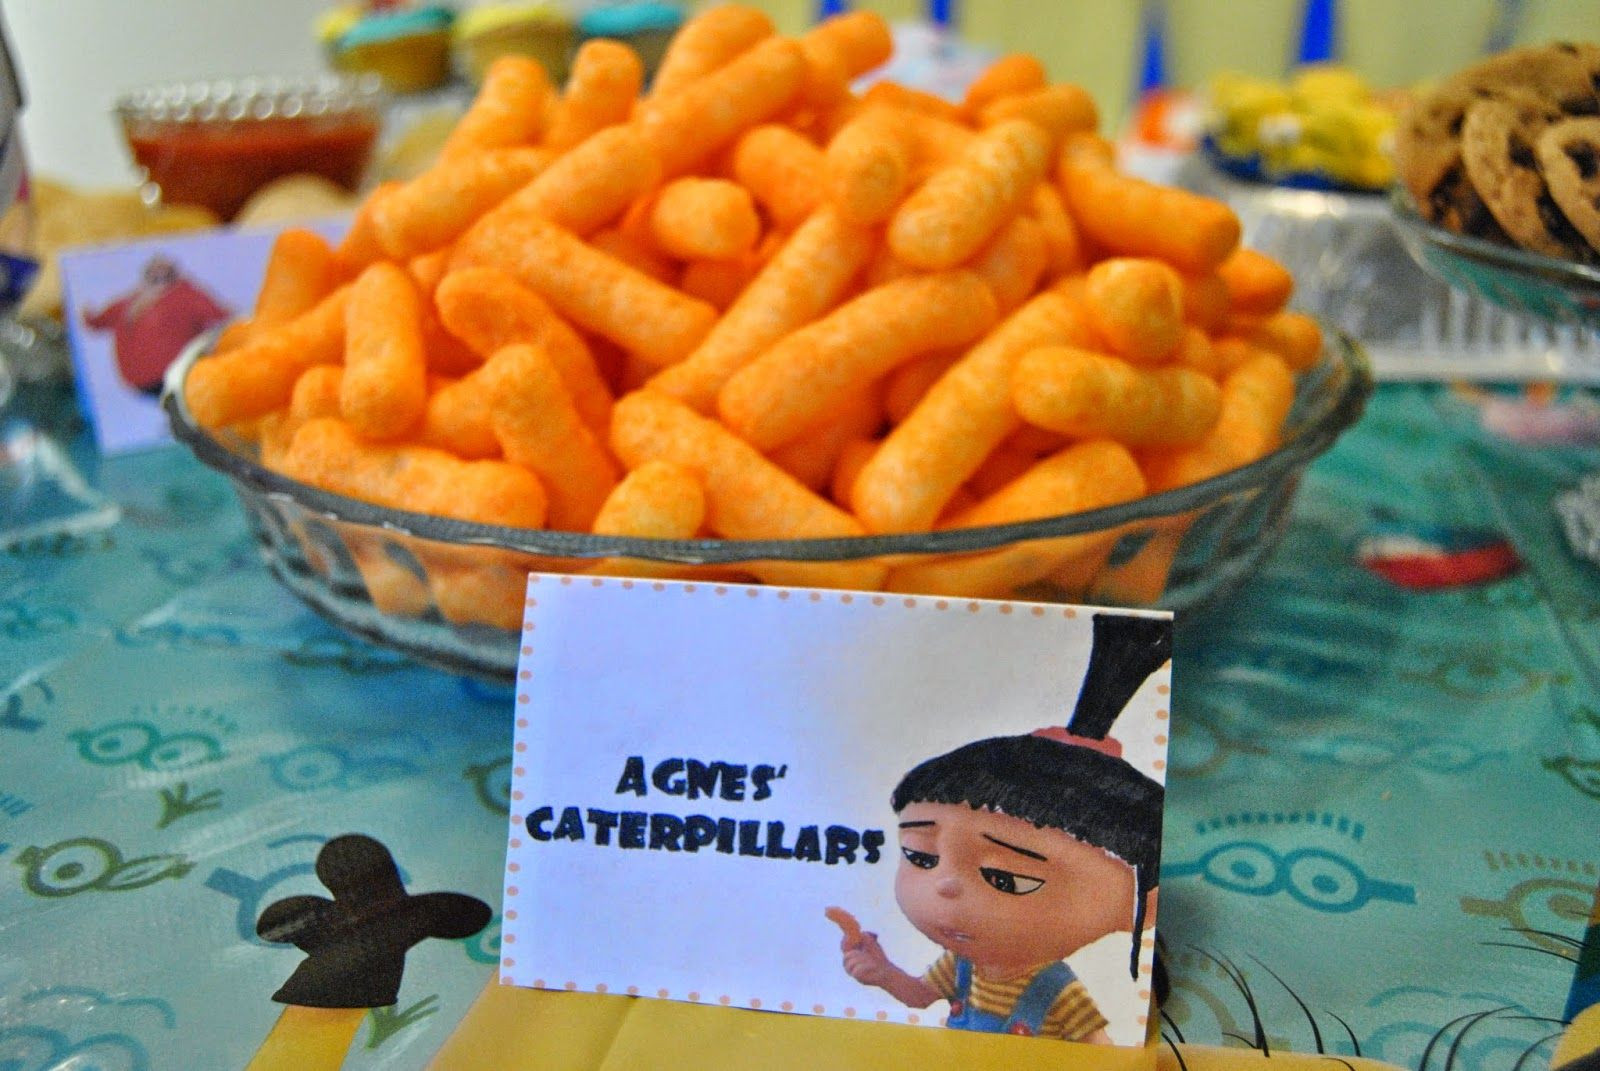 Despicable Me Party Food Ideas
 Food ideas for a Despicable Me party Labels available on